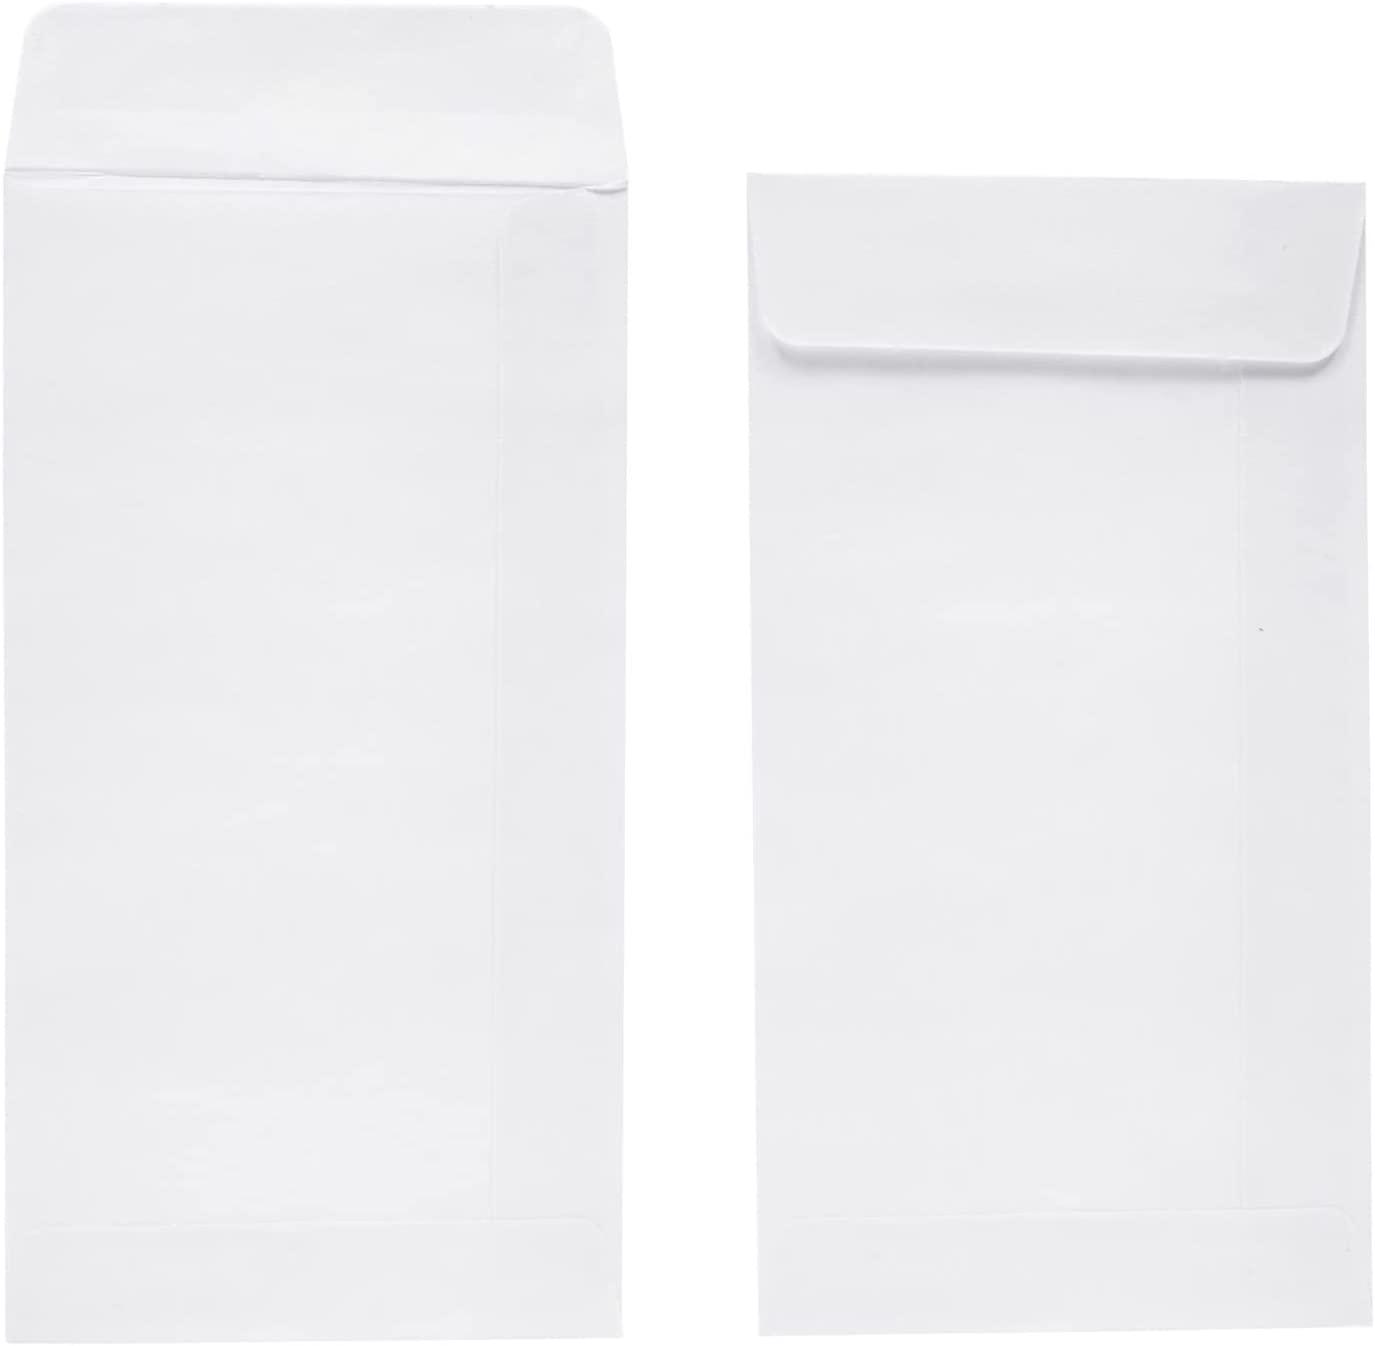 Juvale 100-Pk Money Envelopes for Cash, Coins, Budgeting, Gifts (White, 3.5 x 6.5 in) - Lasercutwraps Shop